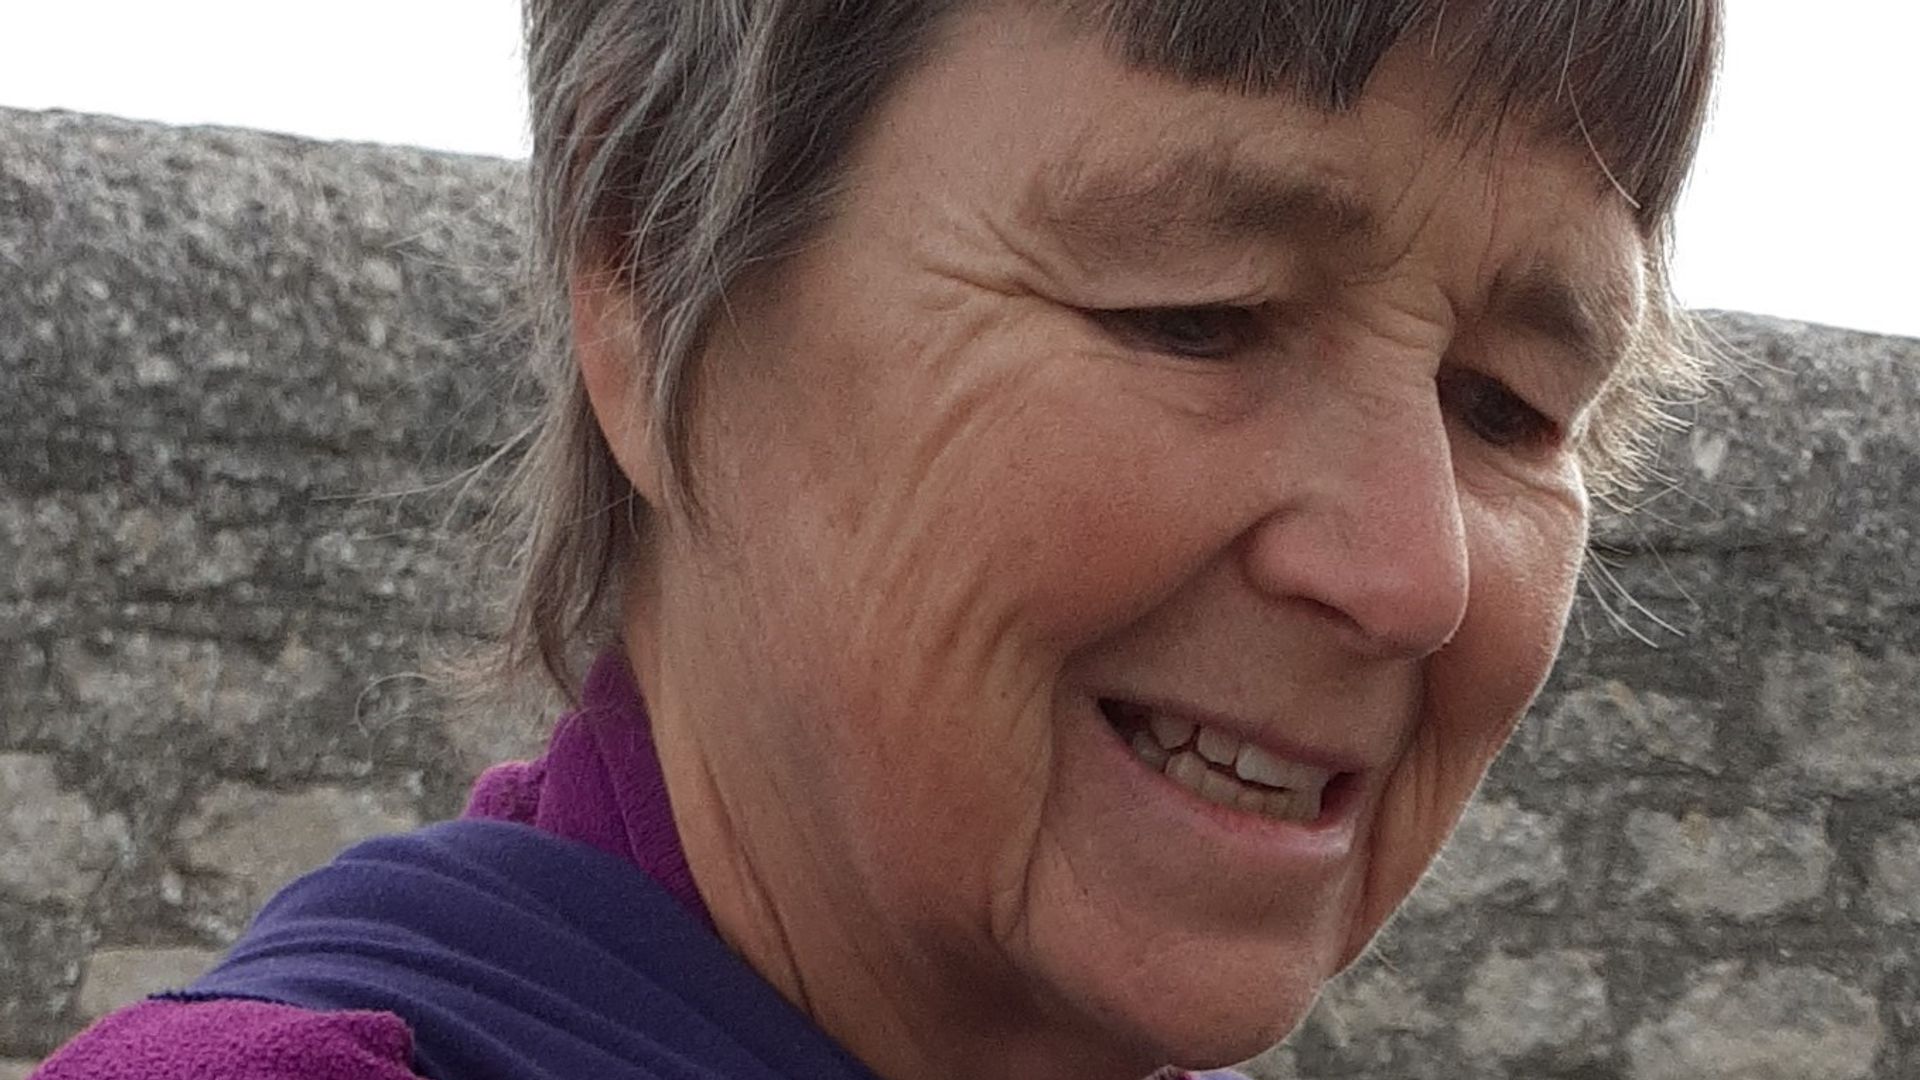 Search for hillwalker who disappeared during hike